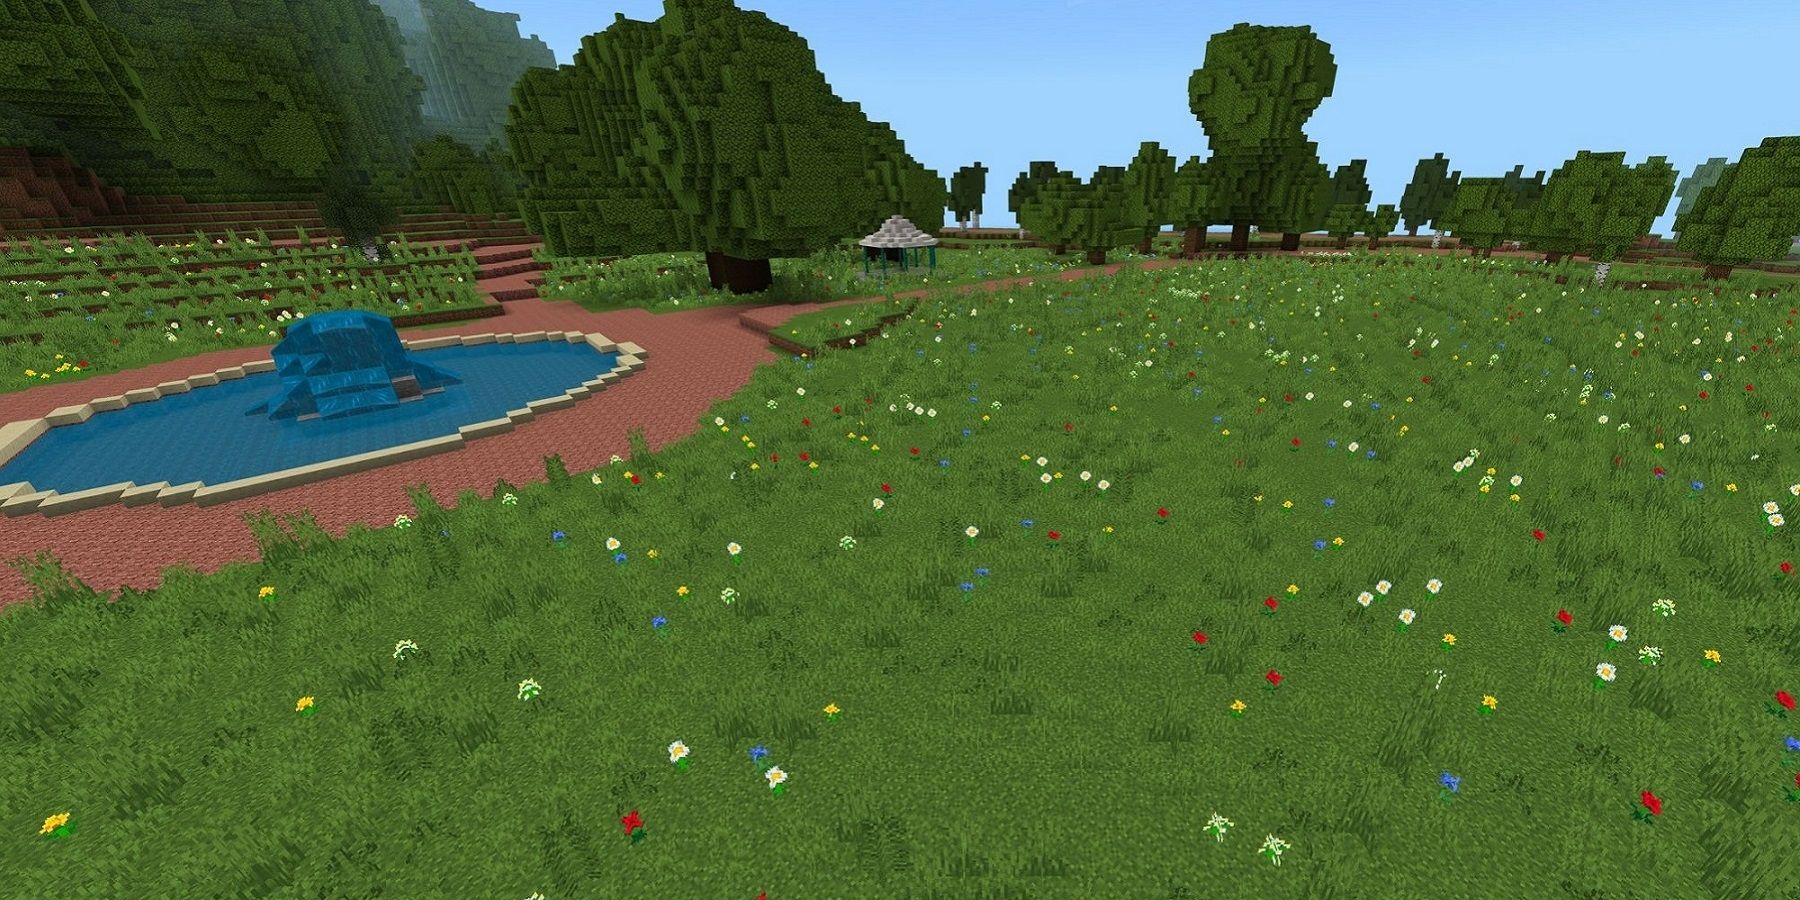 Image from the Rivercraft world in Minecraft, showing a field with a fountain to one side.